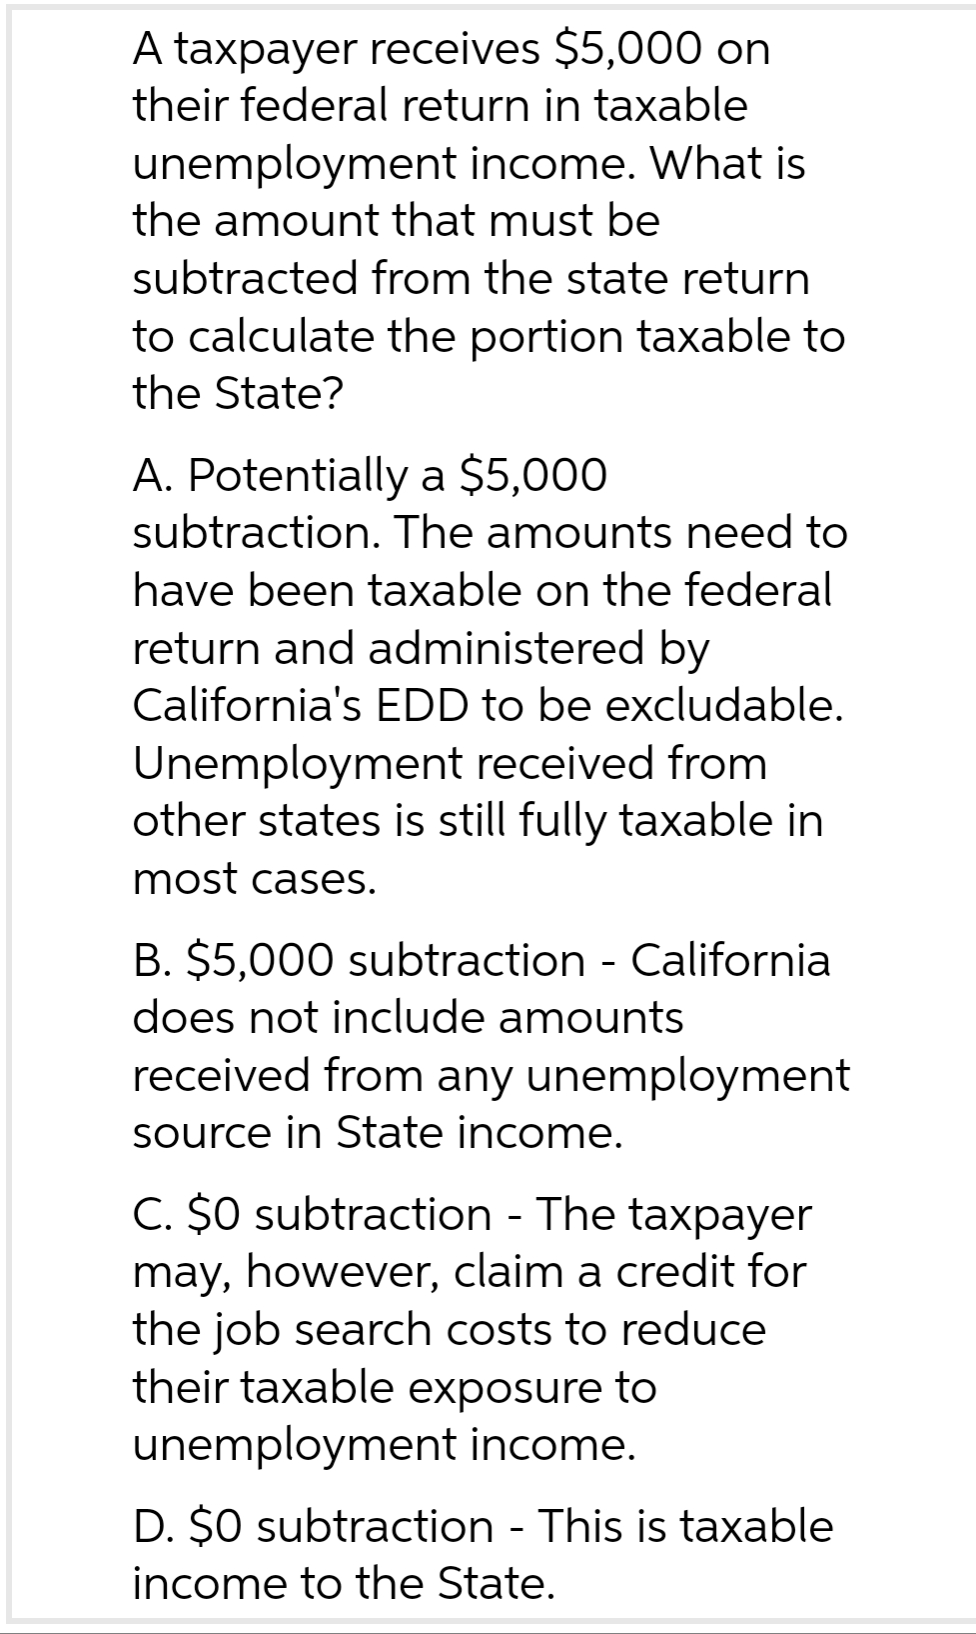 A taxpayer receives $5,000 on
their federal return in taxable
unemployment income. What is
the amount that must be
subtracted from the state return
to calculate the portion taxable to
the State?
A. Potentially a $5,000
subtraction. The amounts need to
have been taxable on the federal
return and administered by
California's EDD to be excludable.
Unemployment received from
other states is still fully taxable in
most cases.
B. $5,000 subtraction - California
does not include amounts
received from any unemployment
source in State income.
C. $0 subtraction - The taxpayer
may, however, claim a credit for
the job search costs to reduce
their taxable exposure to
unemployment income.
D. $0 subtraction - This is taxable
income to the State.